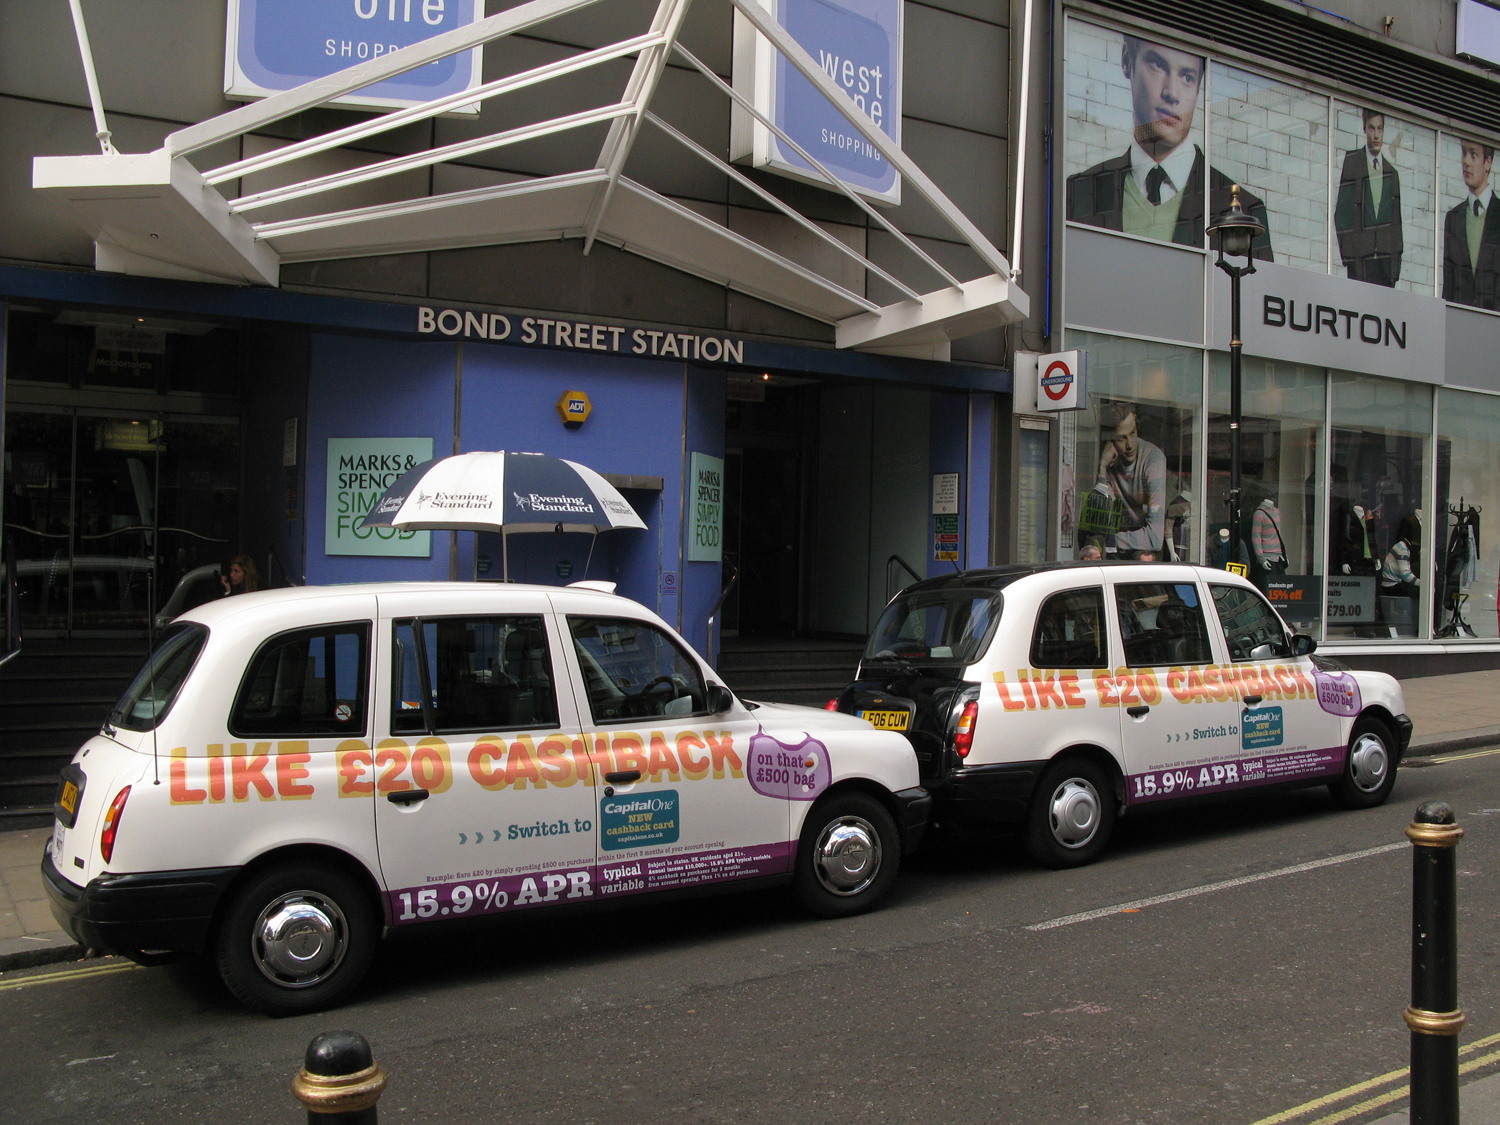 2007 Ubiquitous taxi advertising campaign for Capital One Bank - Like £20 cashback